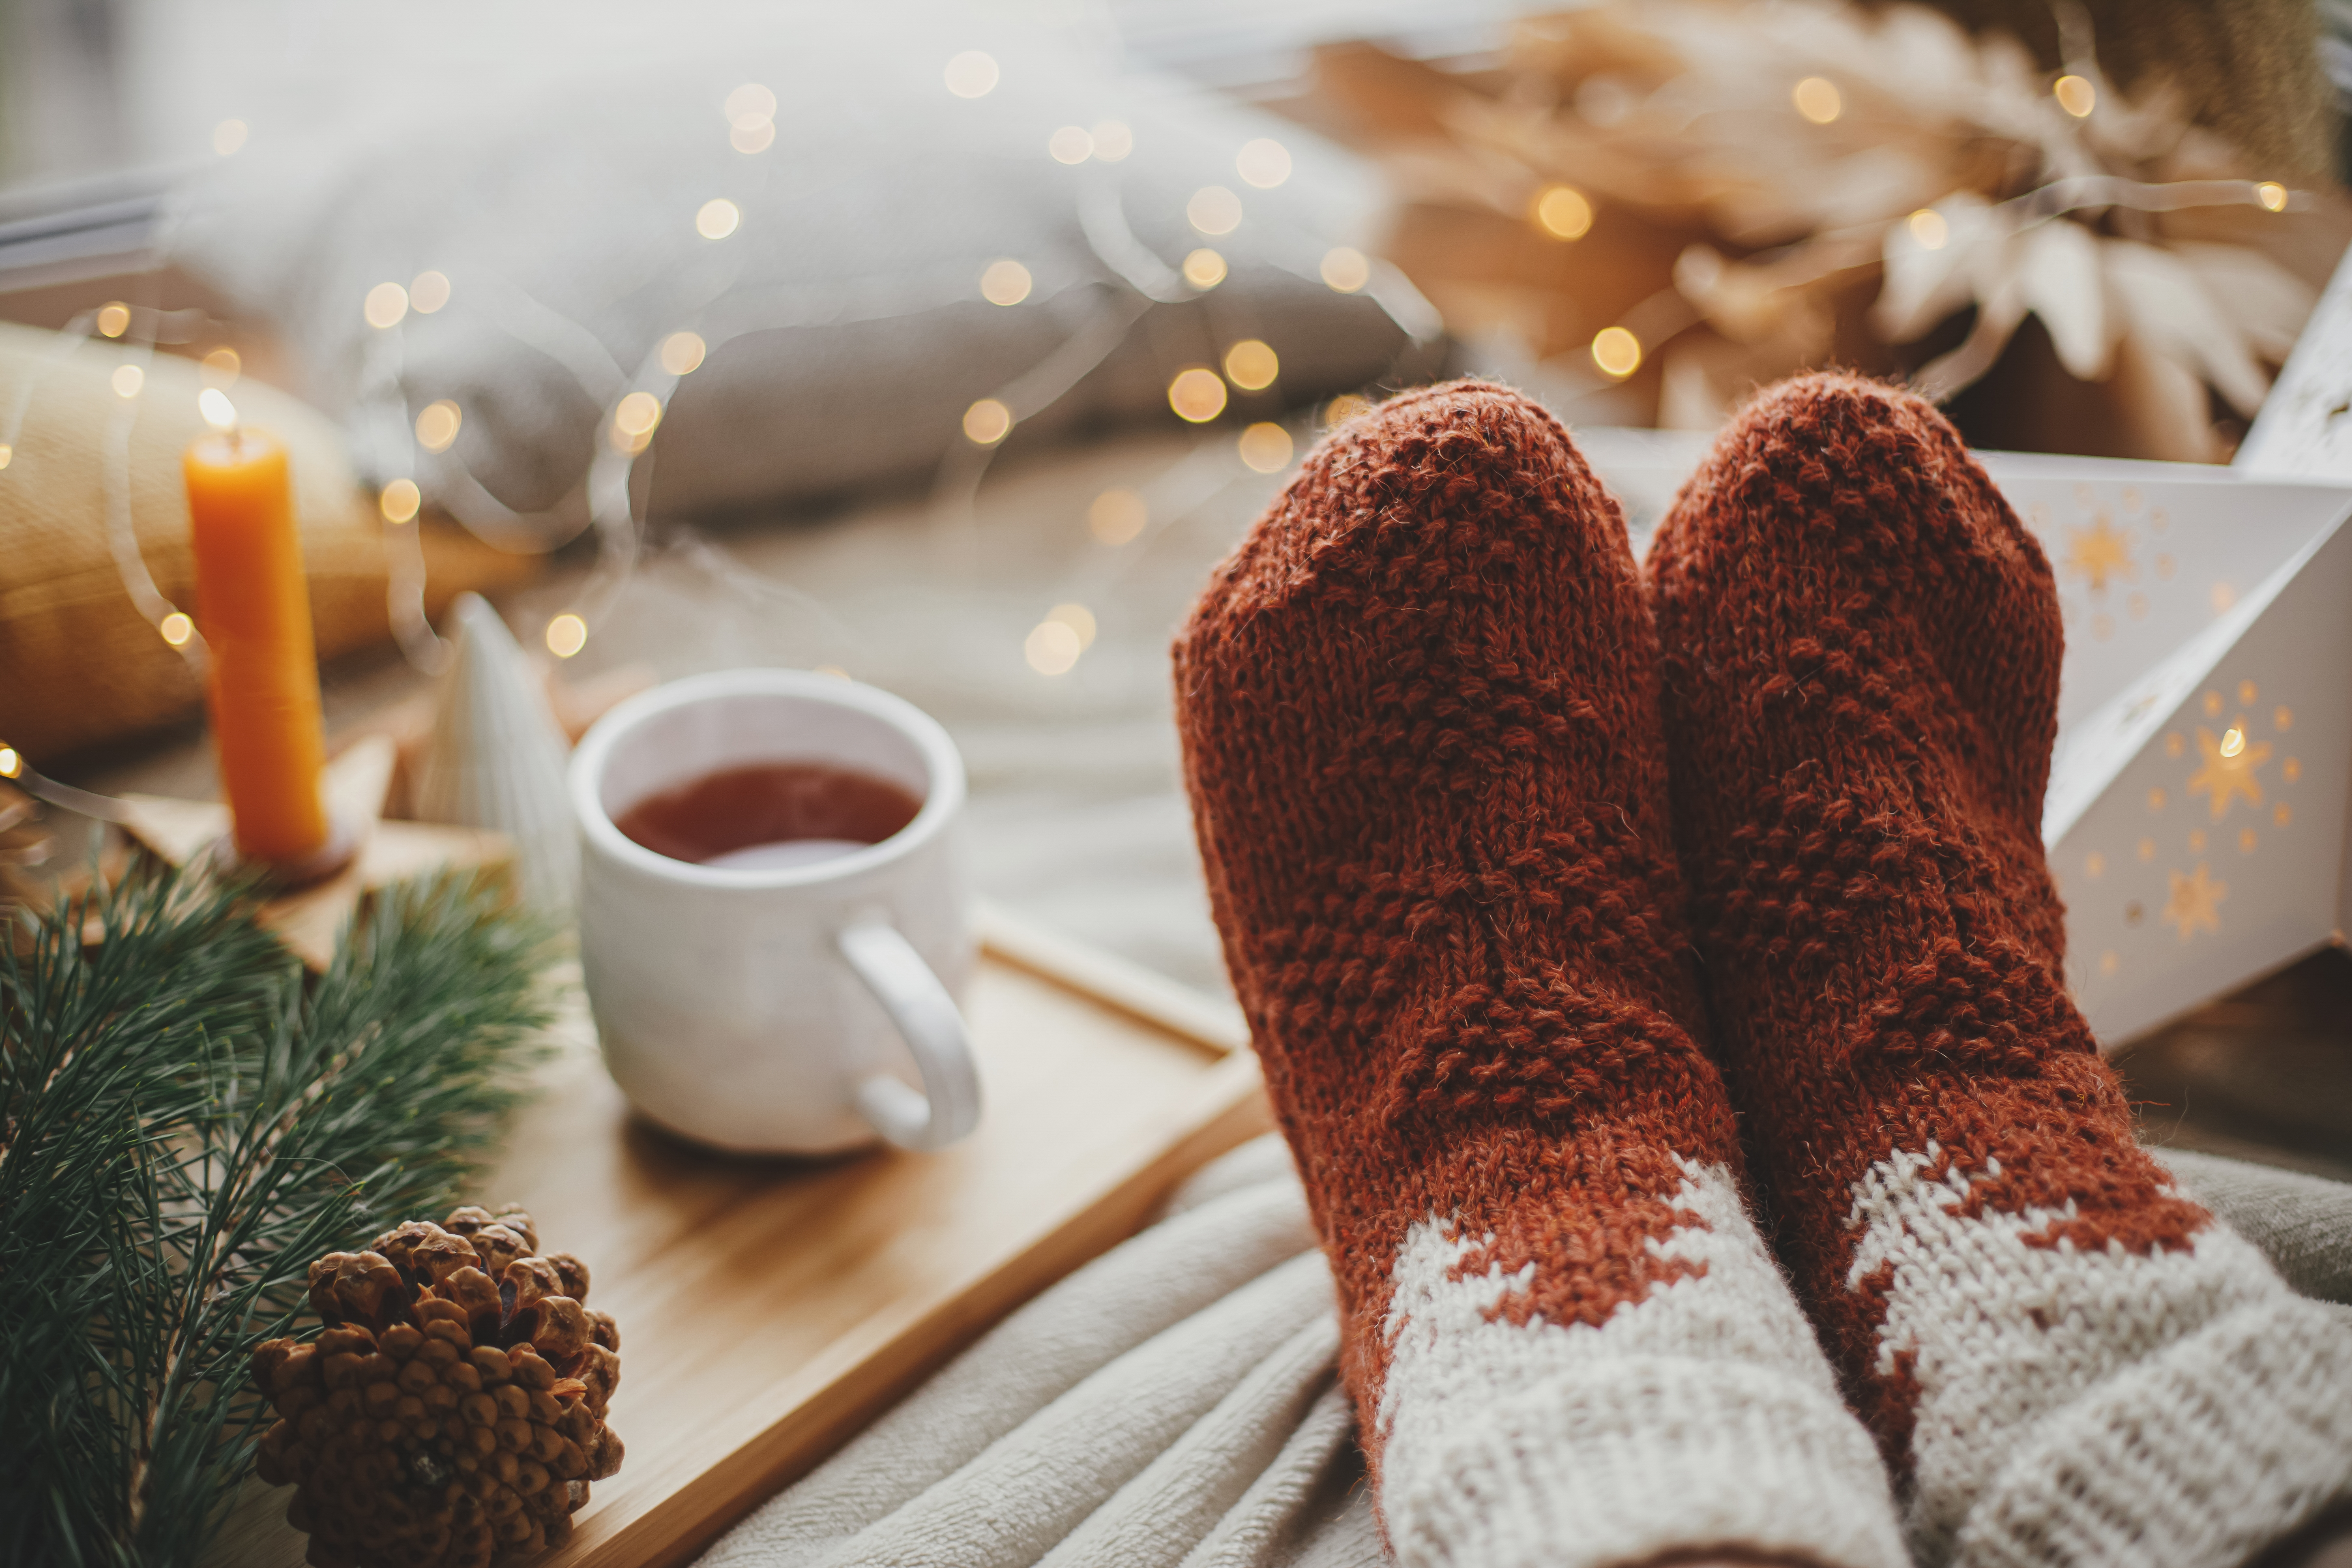 A person wearing cozy socks with tea | Source: Shutterstock